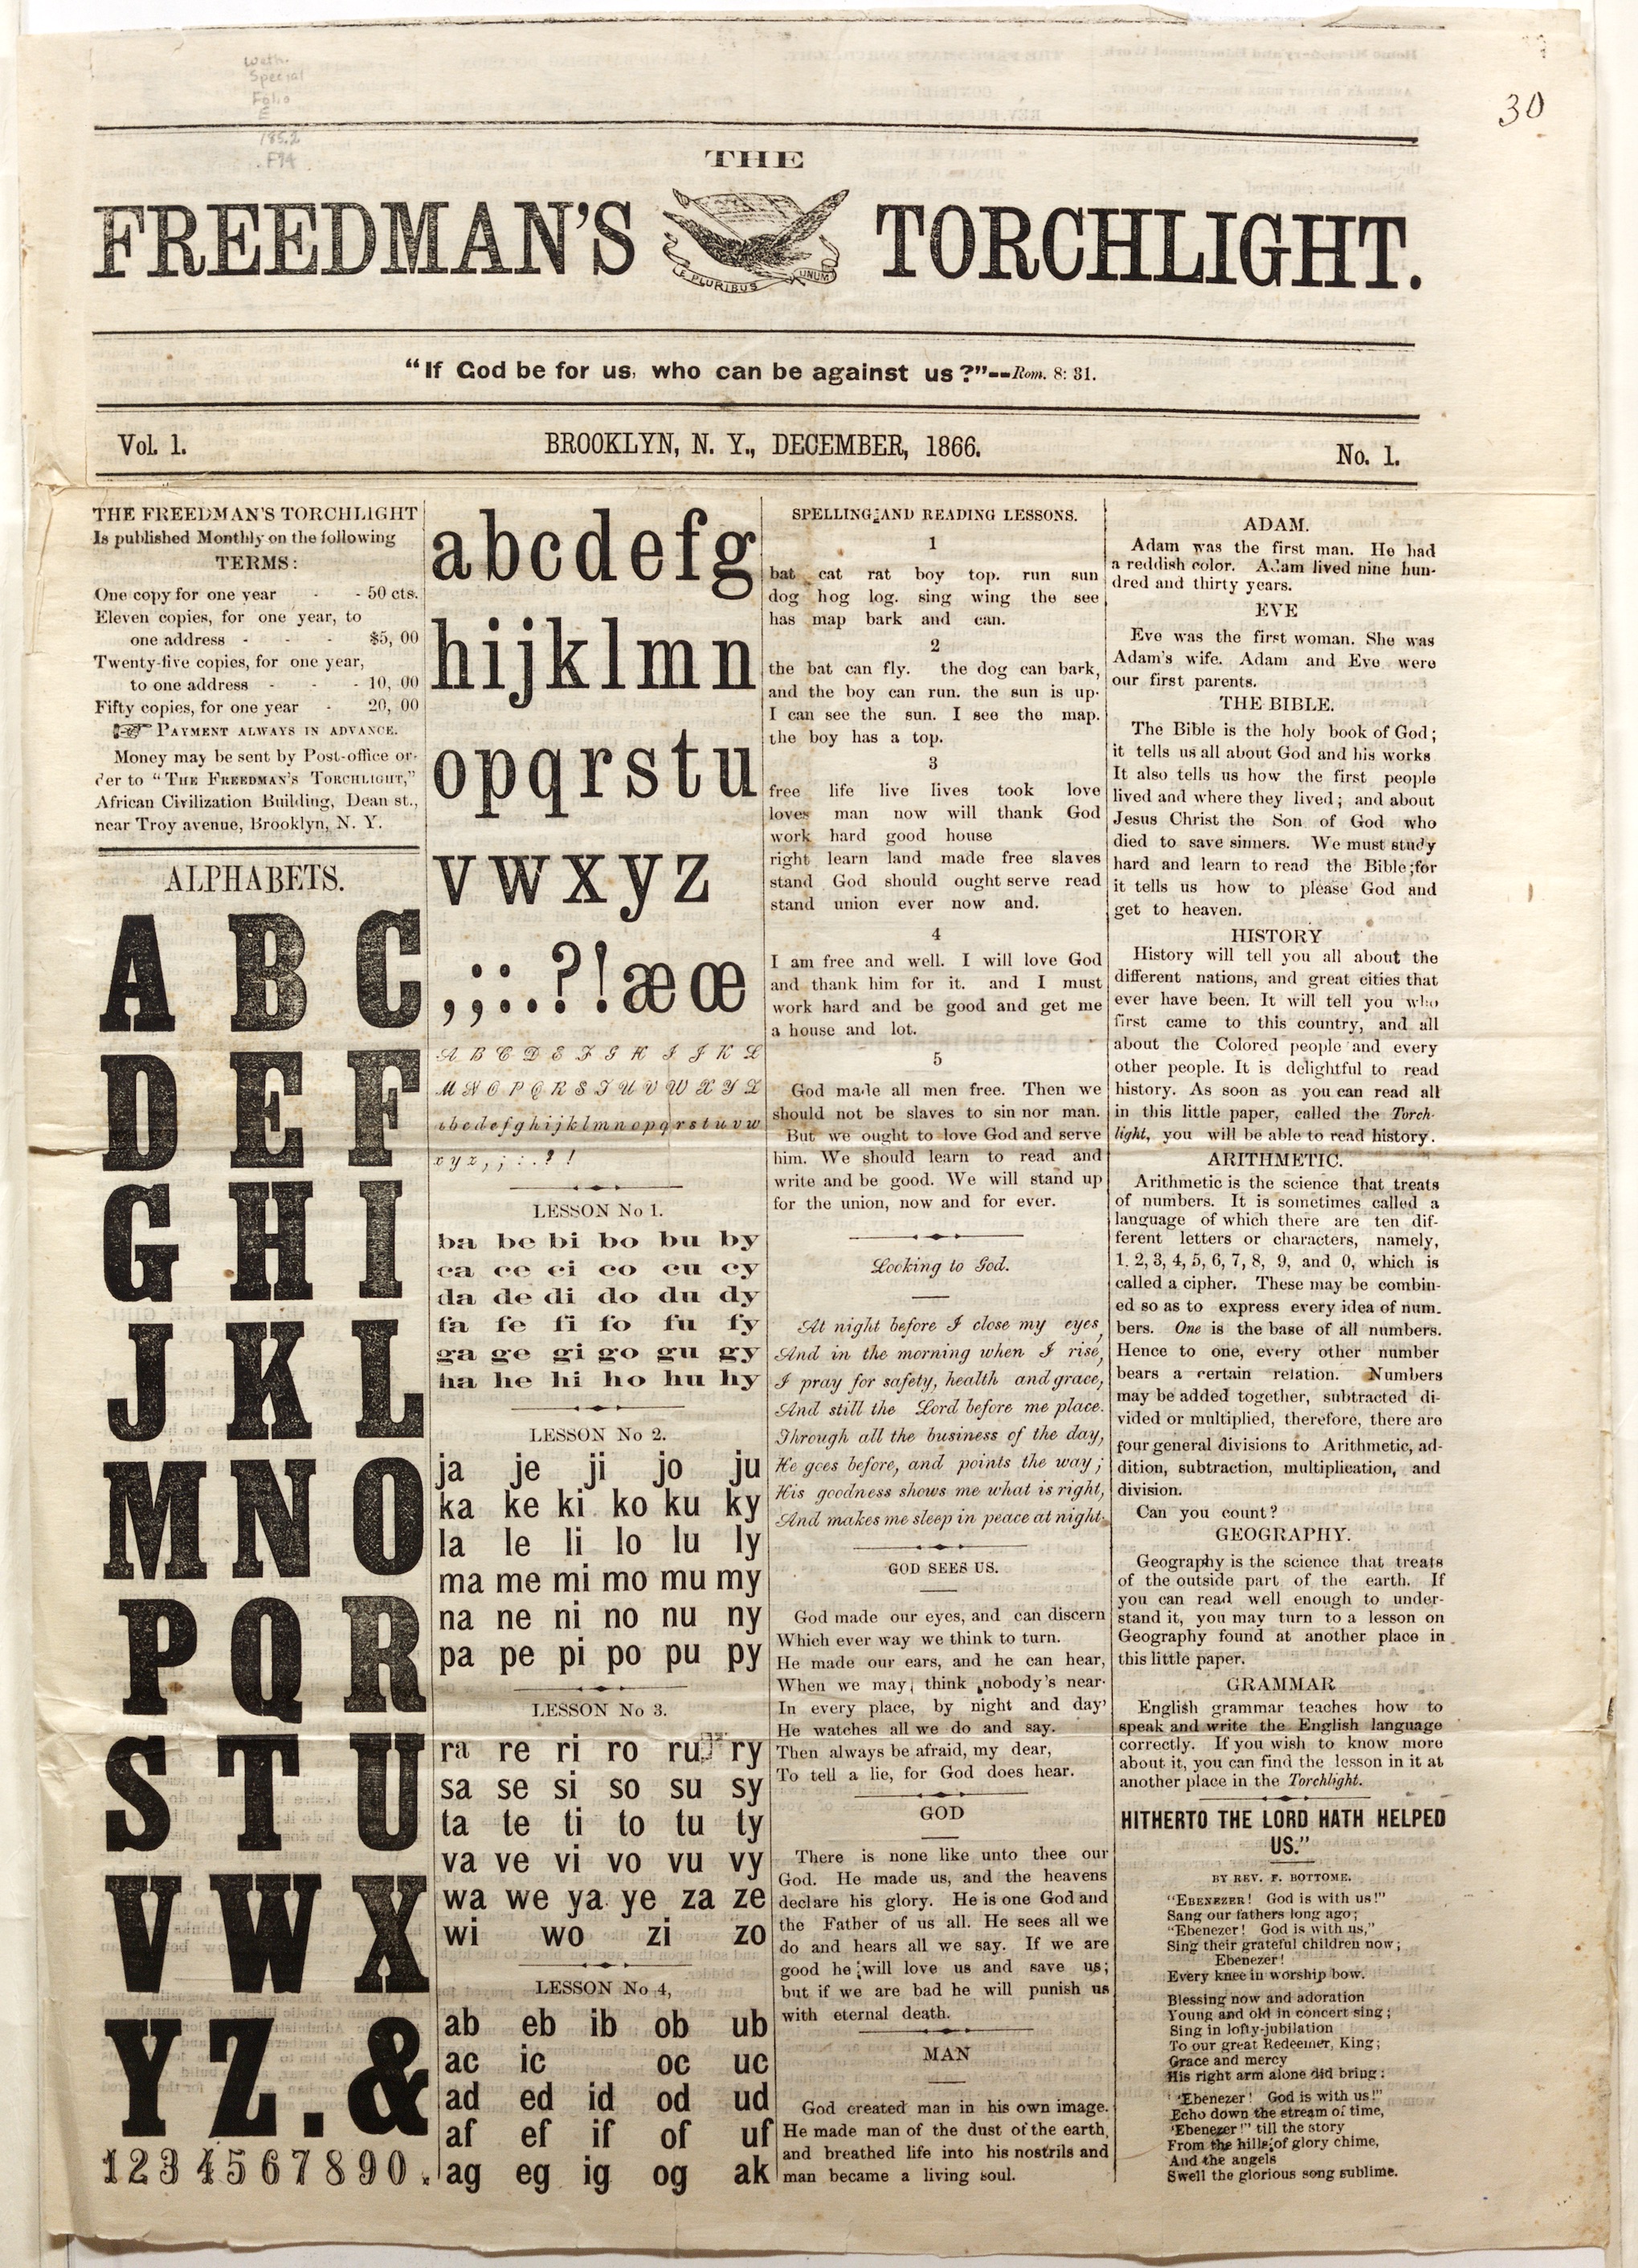 Front page of the Freedman's Torchlight, vol. 1, no. 1, December 1866